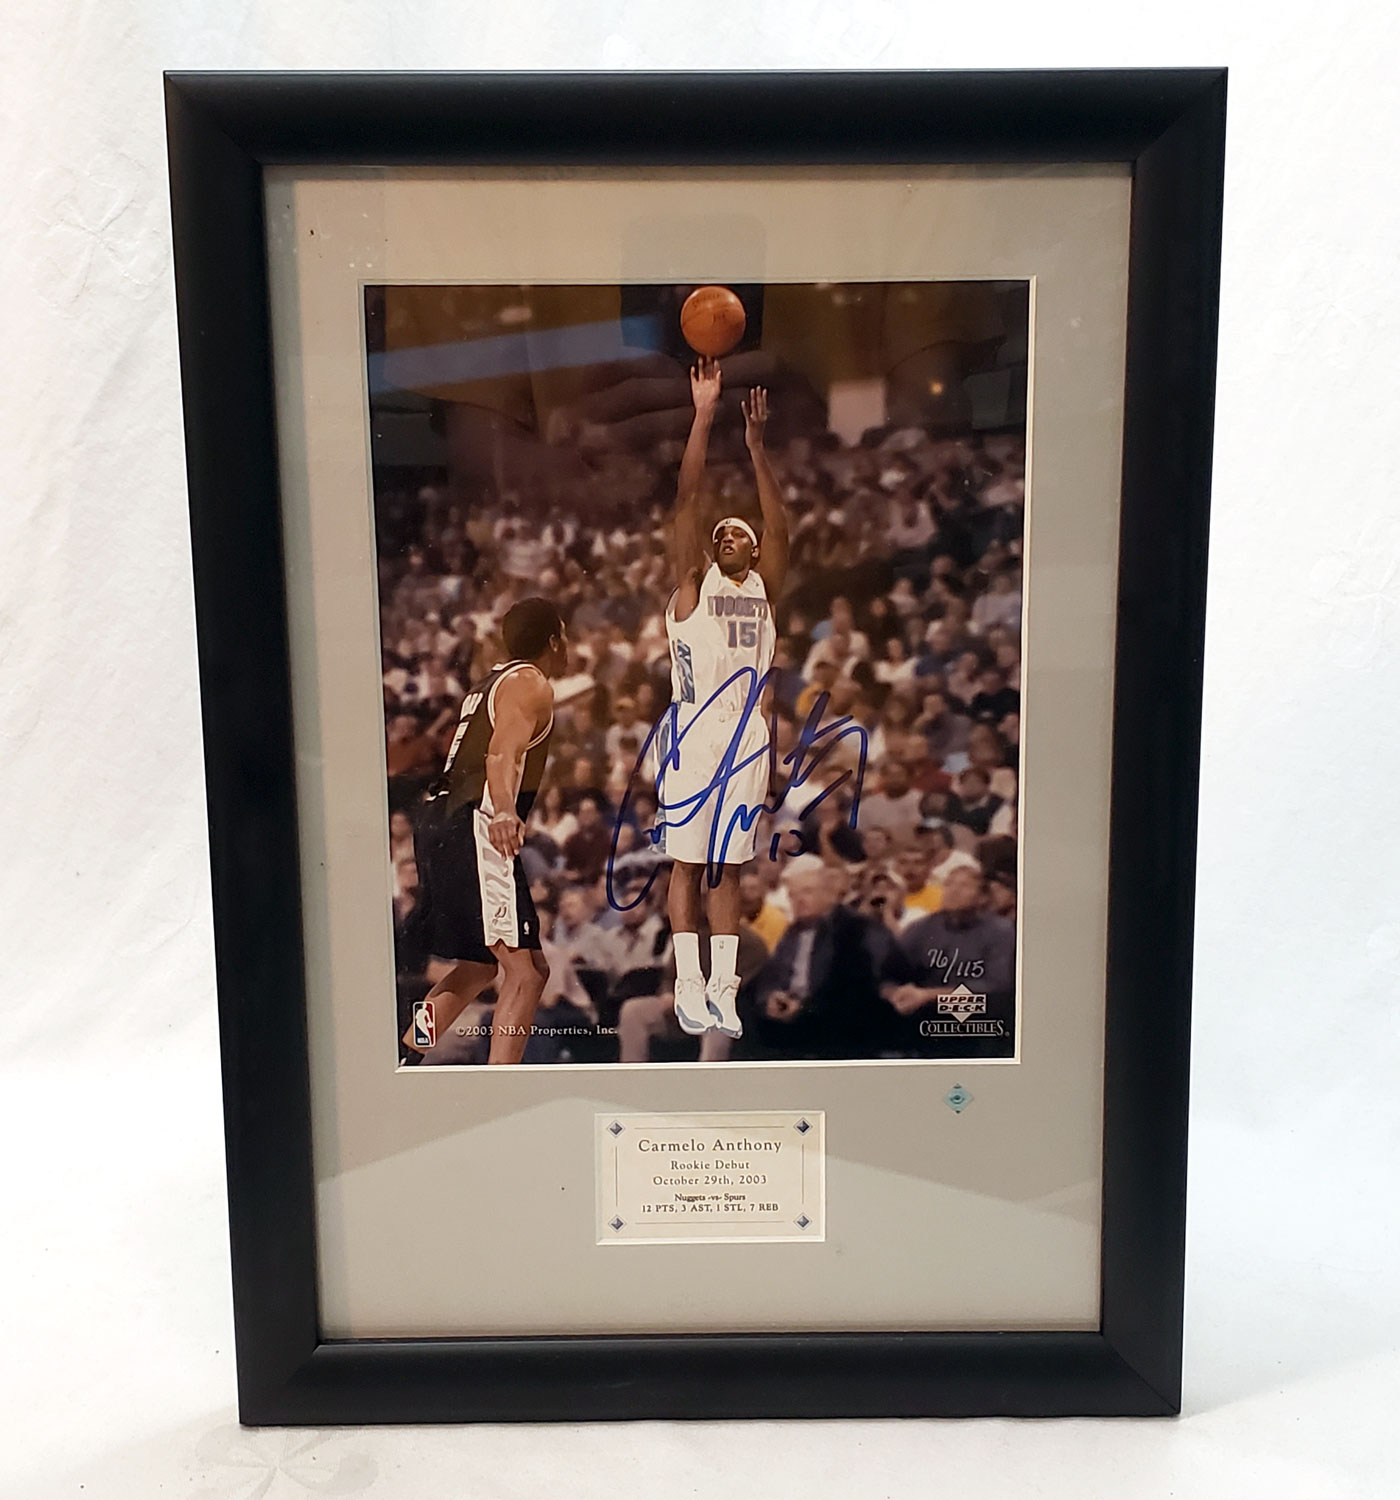 Carmelo Anthony Signed 2007 All-Star Game 8x10 Photo (Steiner COA